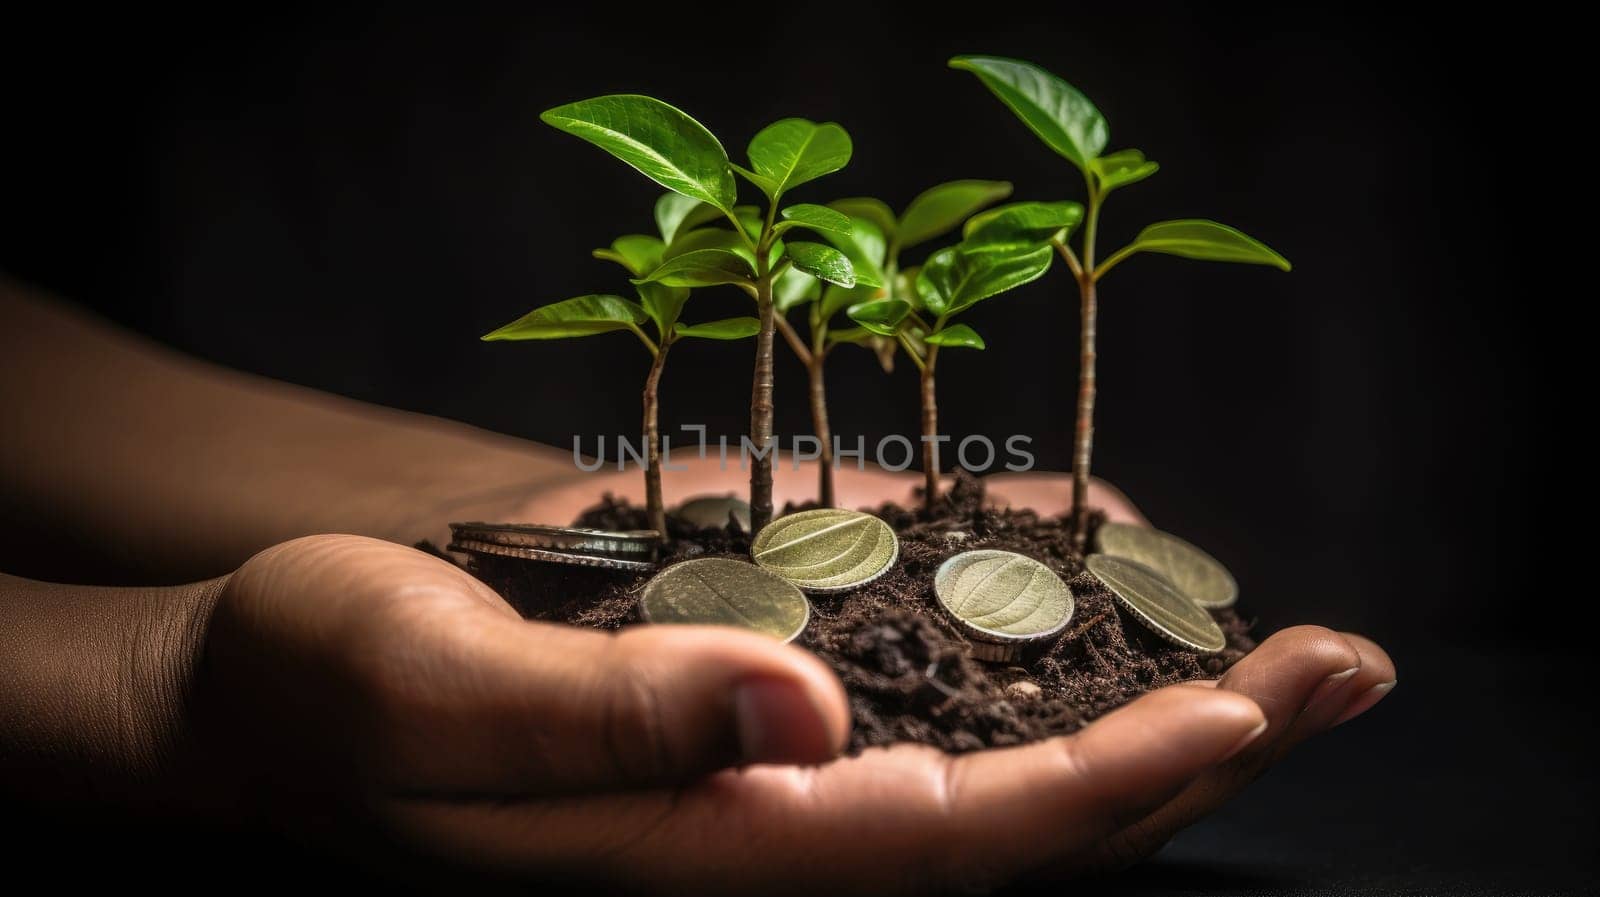 Sapling Emerging from Hand Grasping Silver Coins. Illustrating Green Business Concepts for Finance and Investment. Symbolic Image of Carbon Credits and Eco-Friendly Taxation Strategies for a Greener. by ViShark